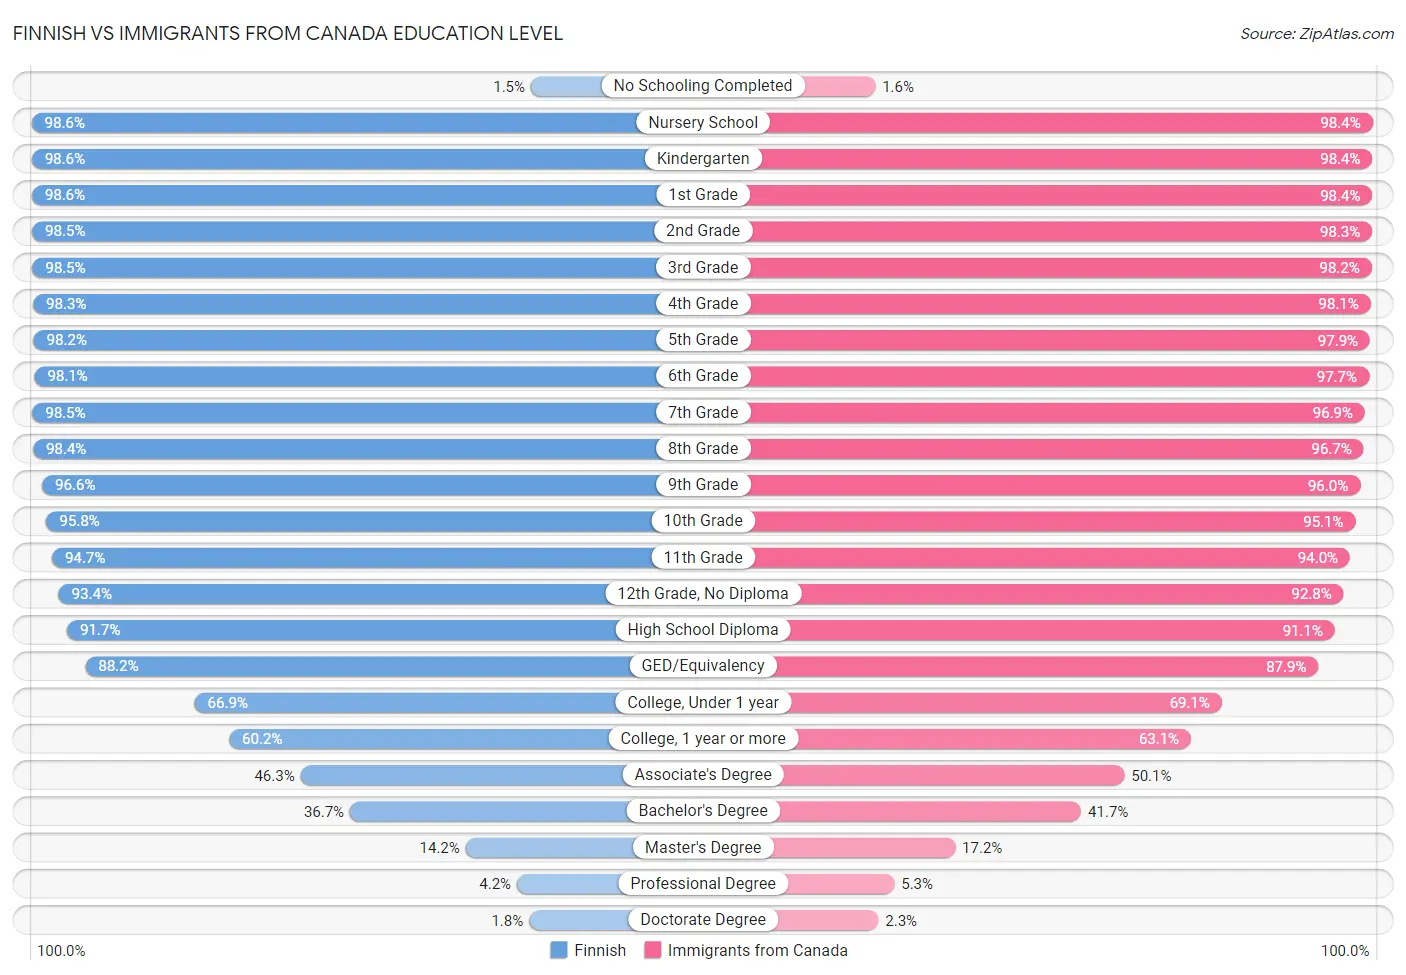 Finnish vs Immigrants from Canada Education Level